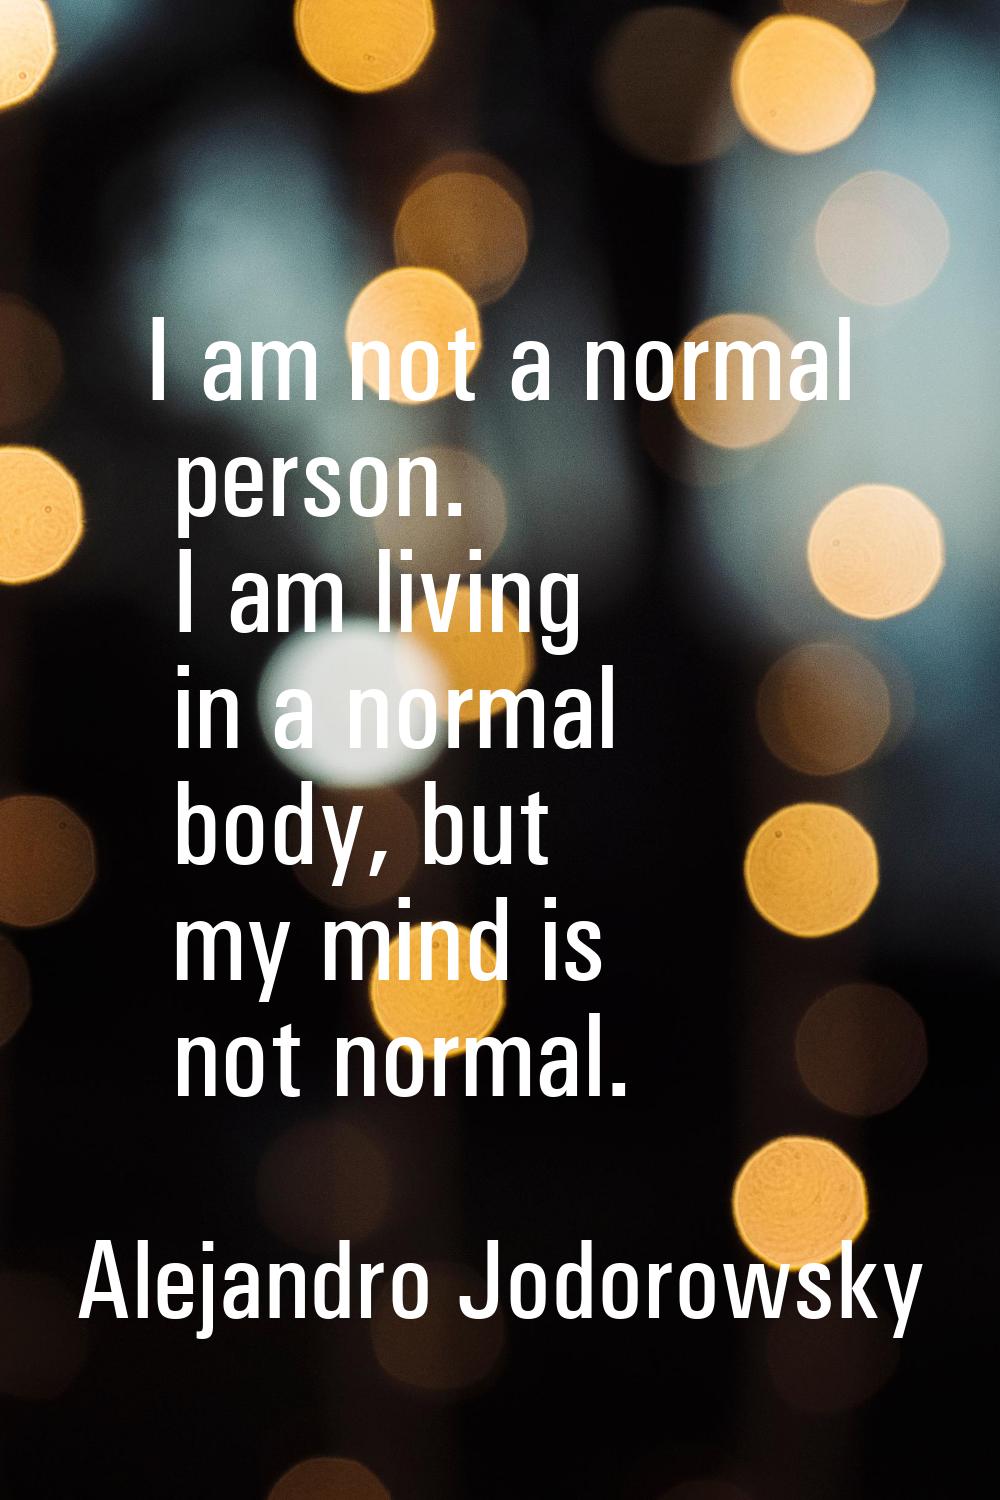 I am not a normal person. I am living in a normal body, but my mind is not normal.